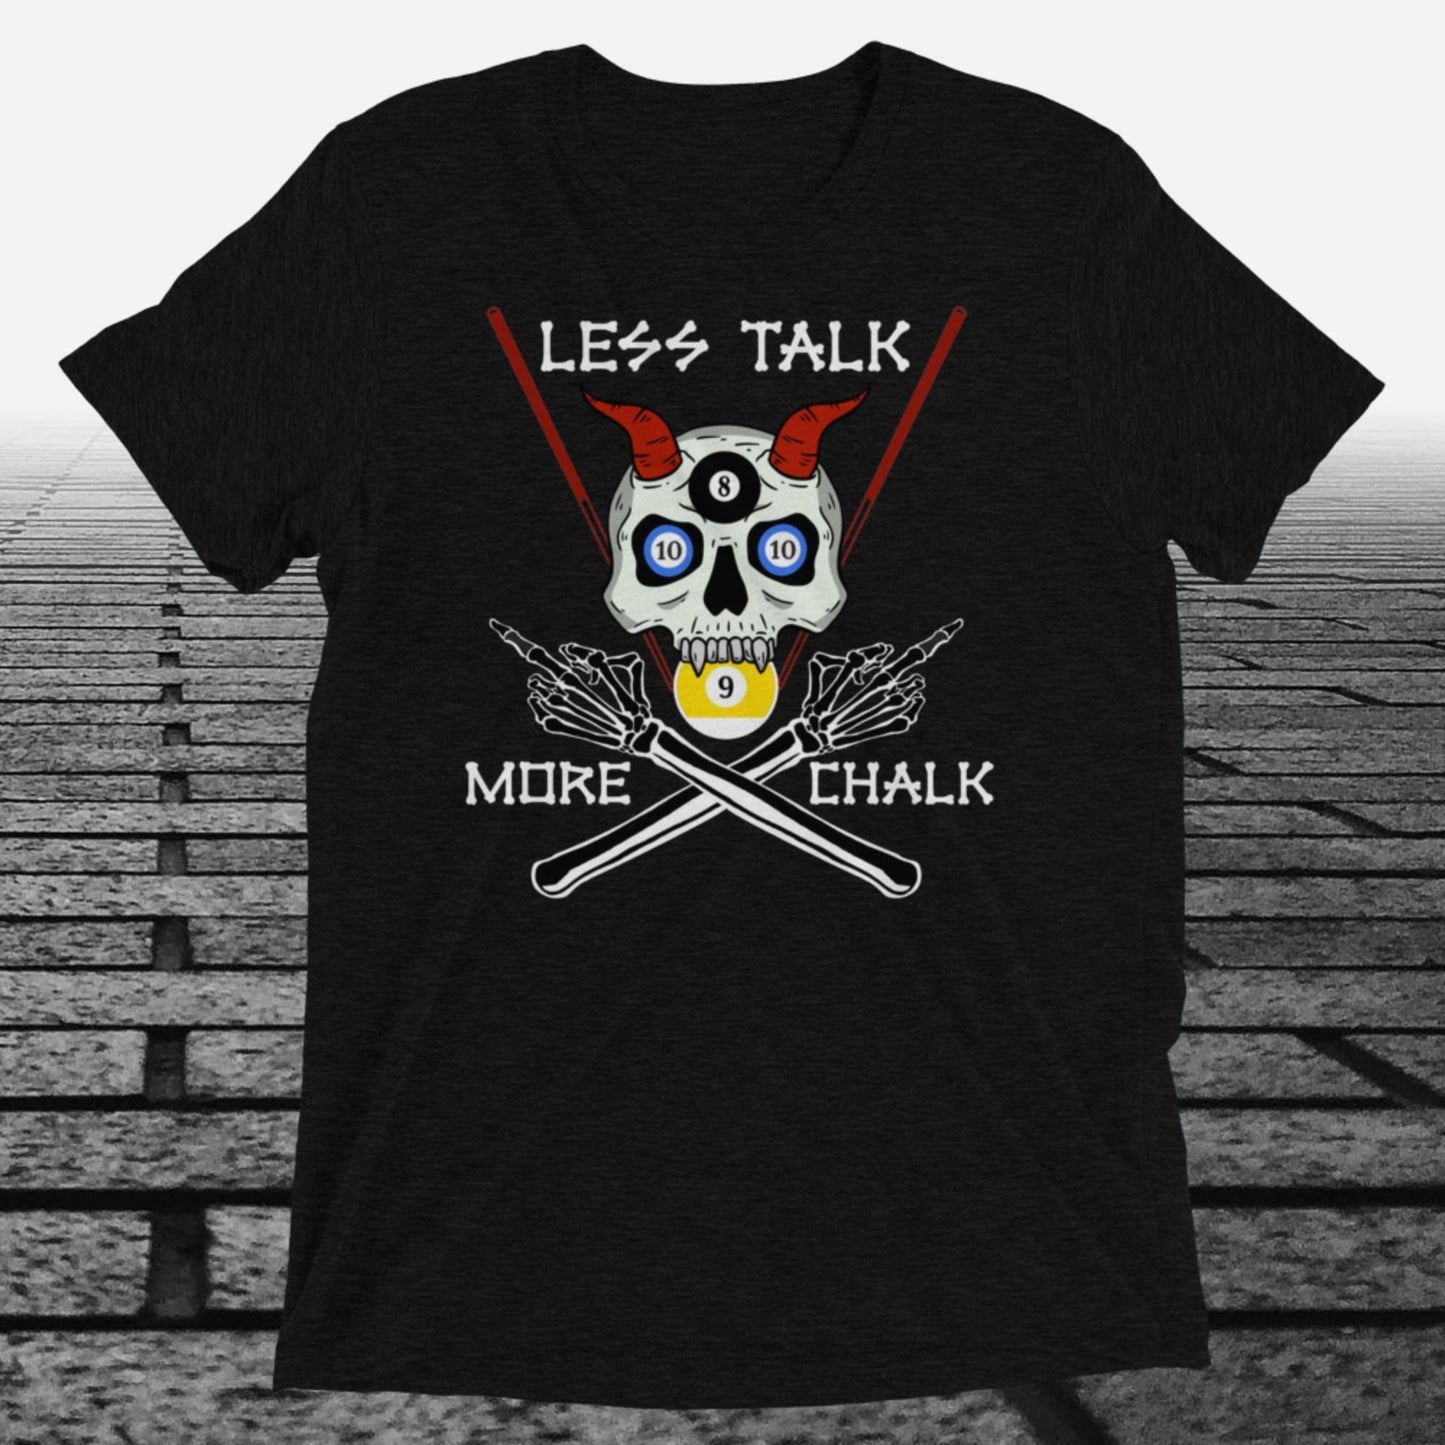 Less Talk More Chalk, on the front, Tri-blend t-shirt